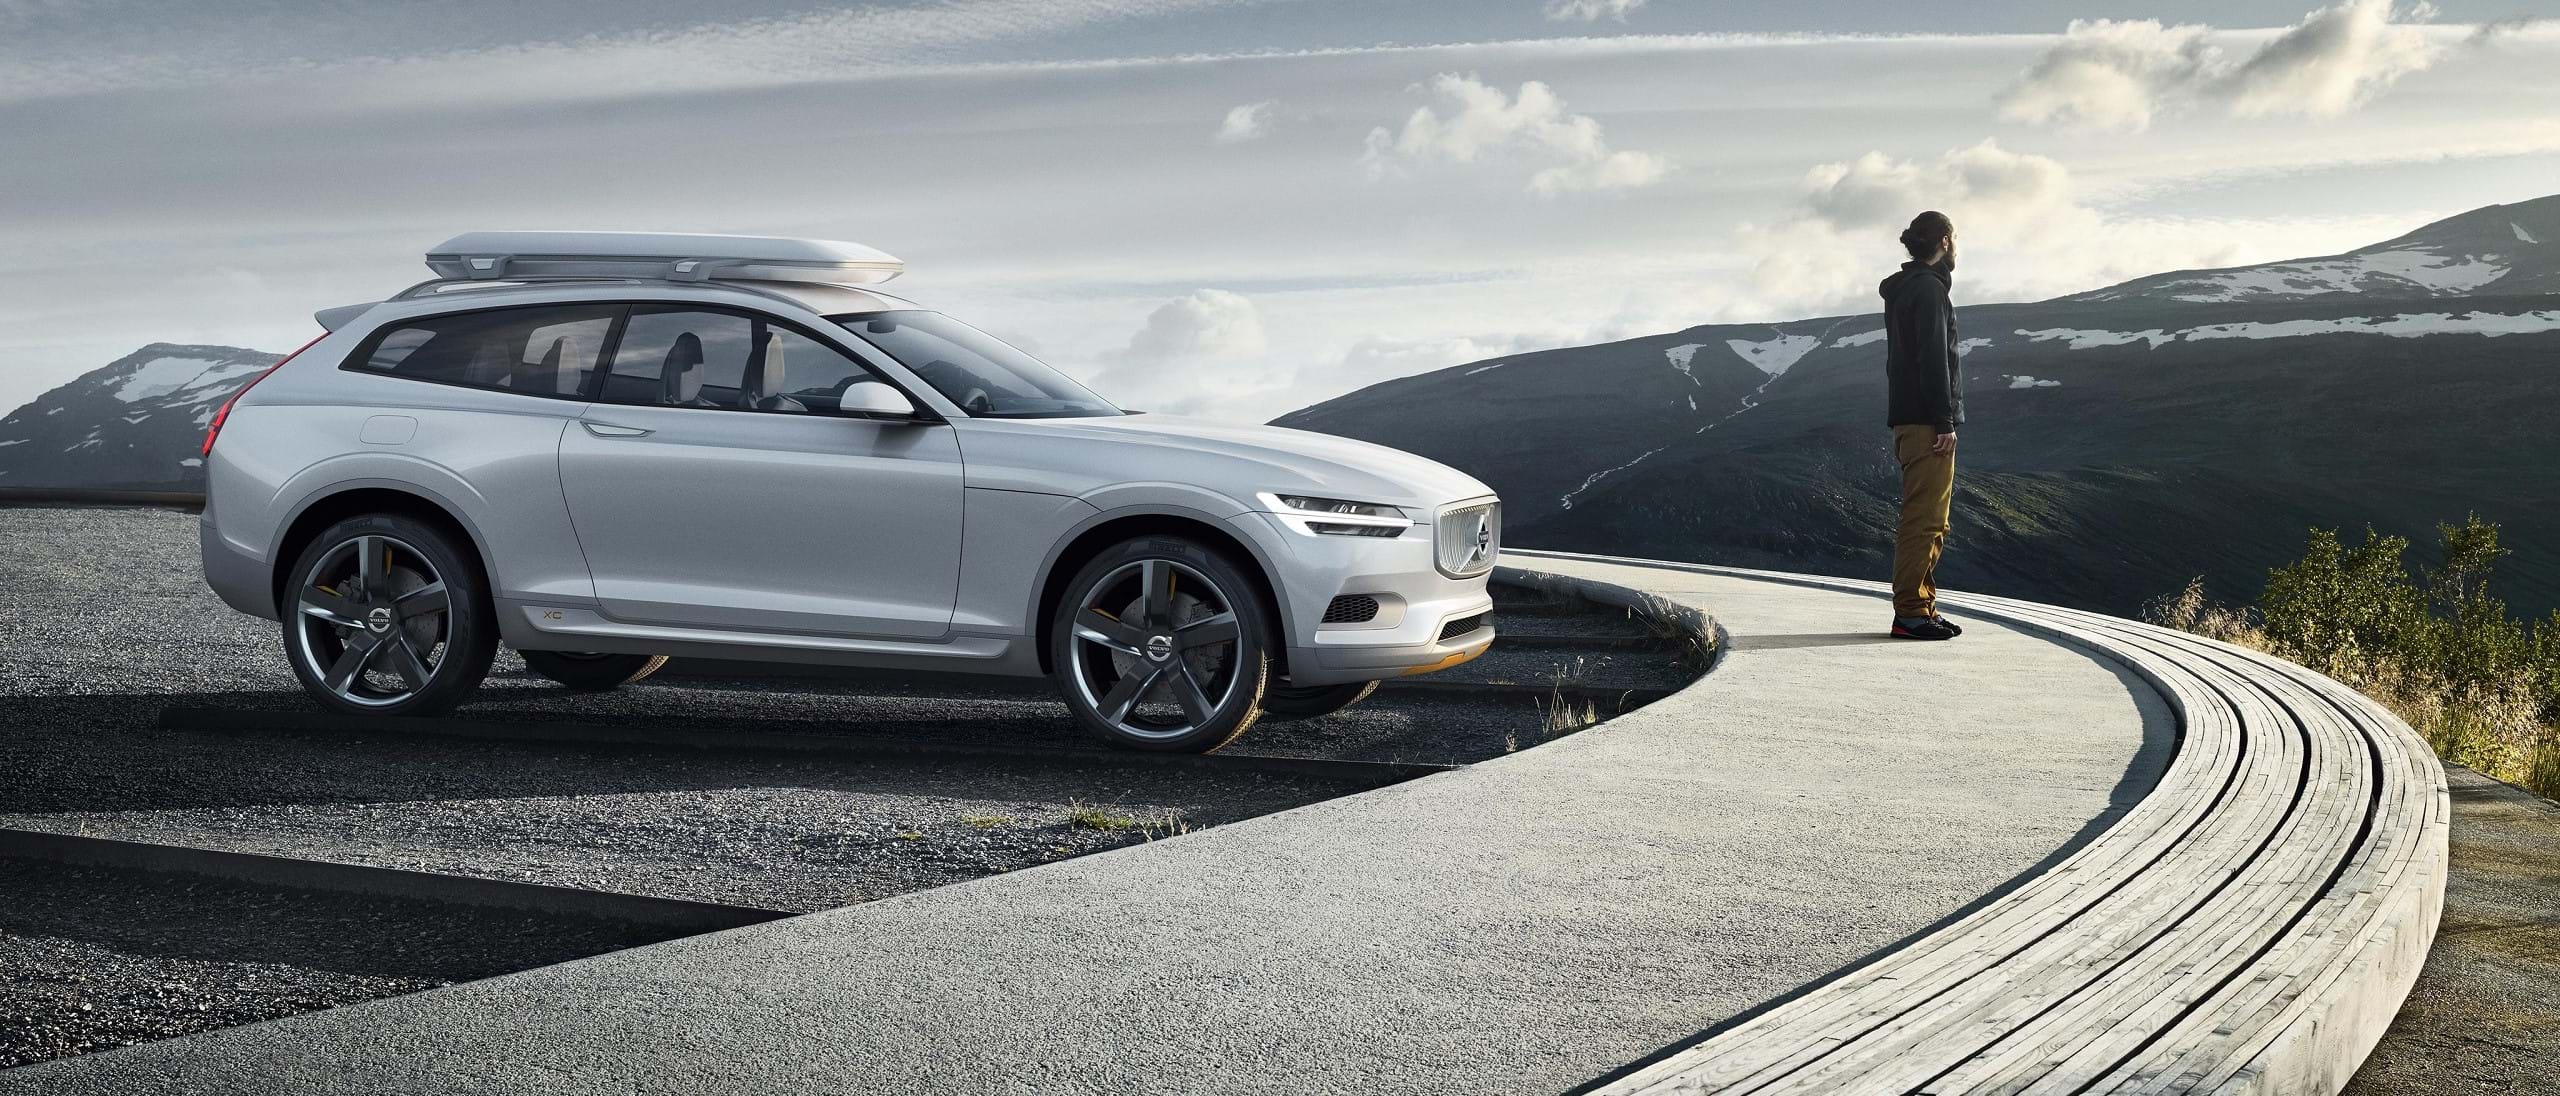 Volvo XC Coupe concept car parked beside curved wall